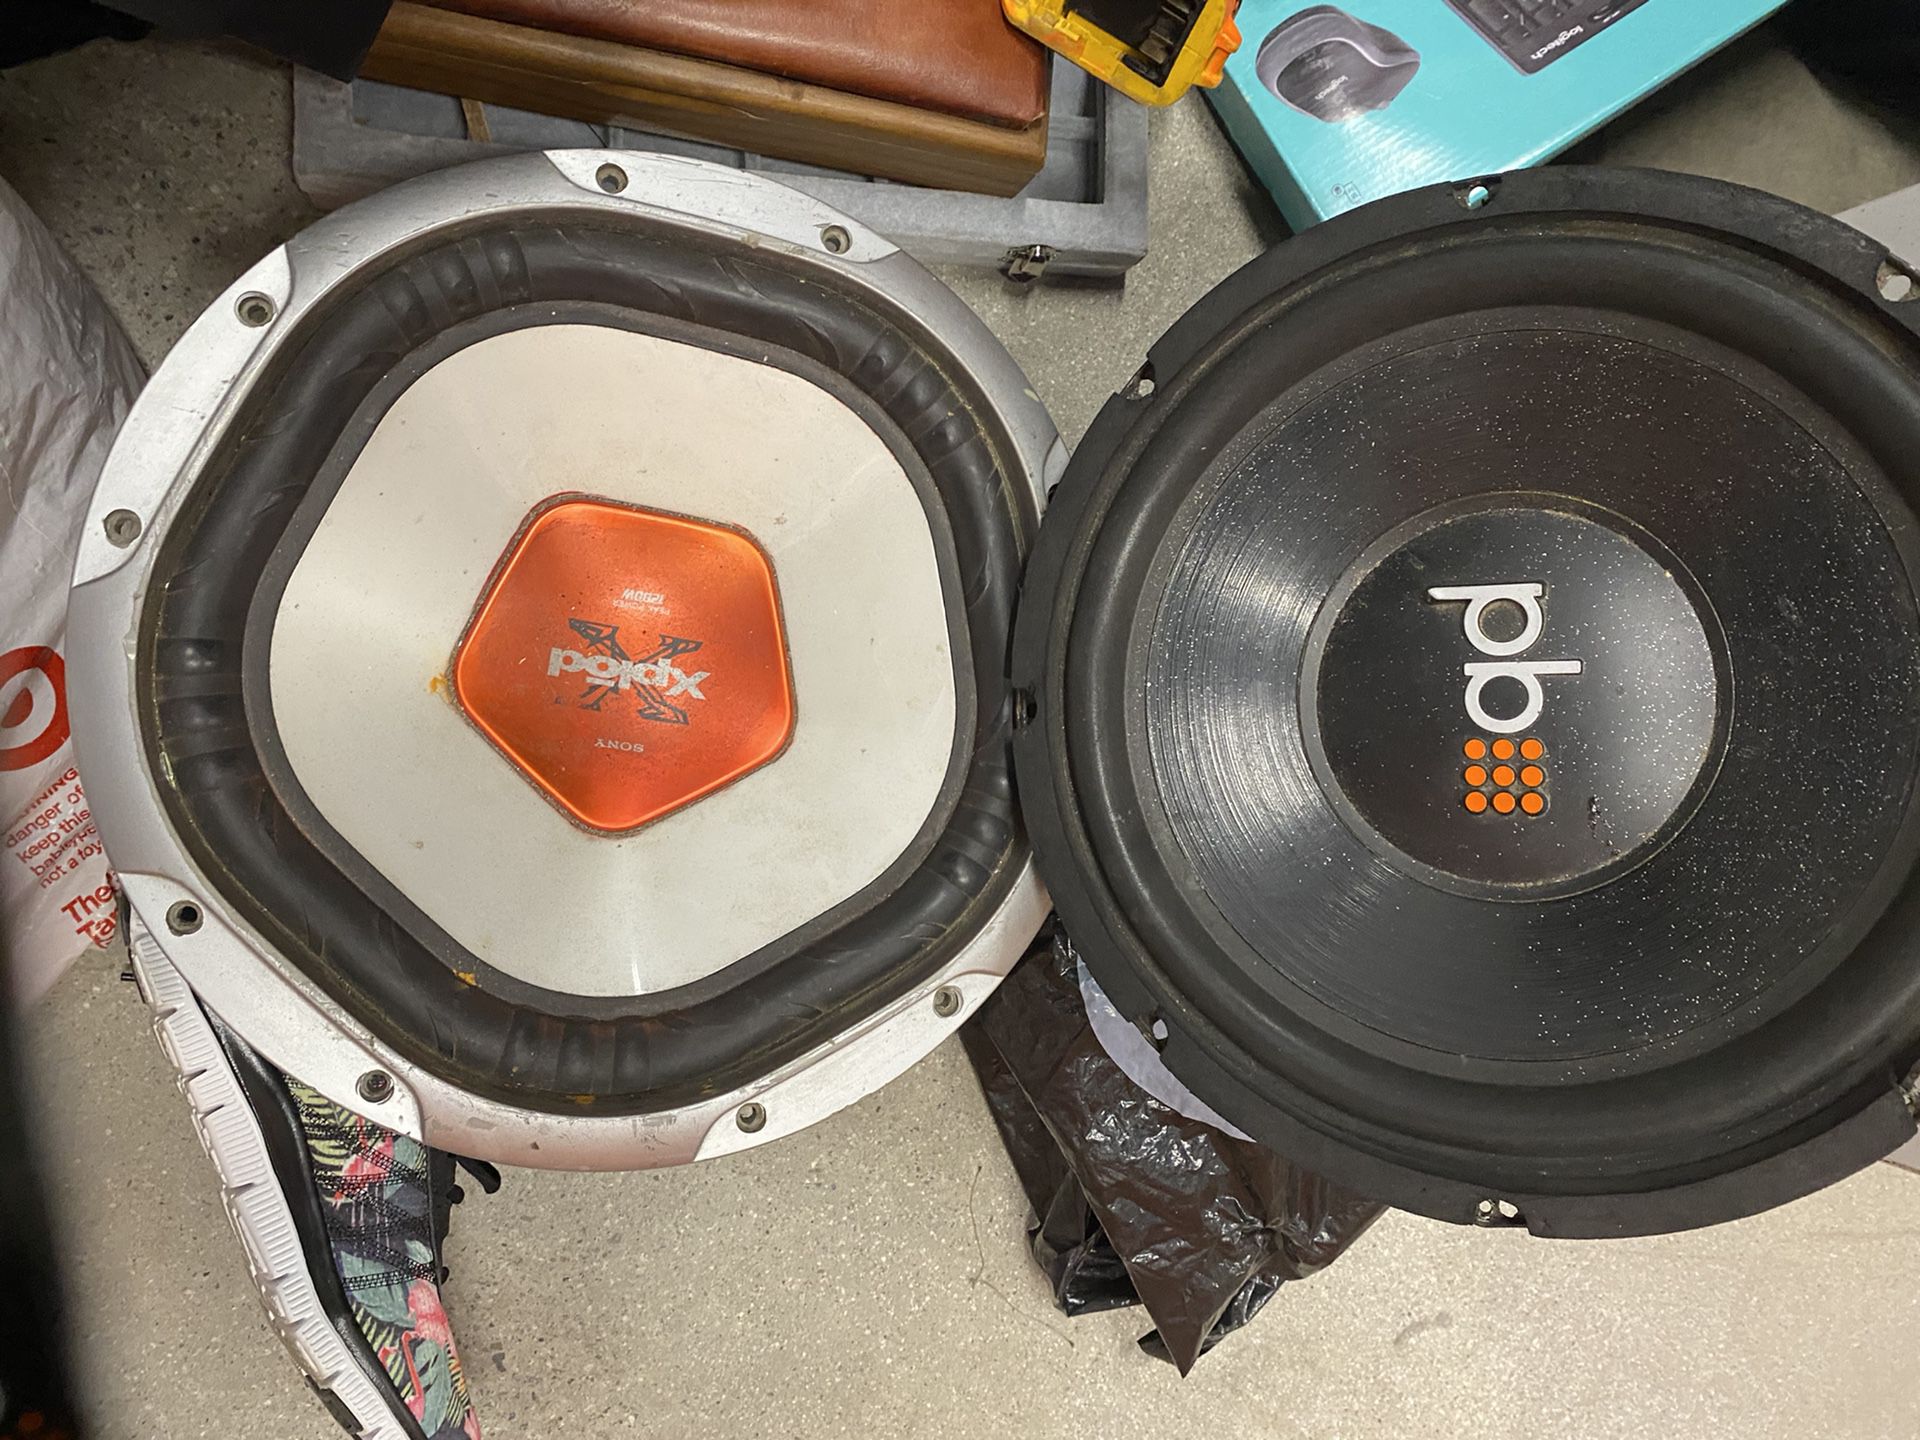 Electronics and speakers priced to sell make offers